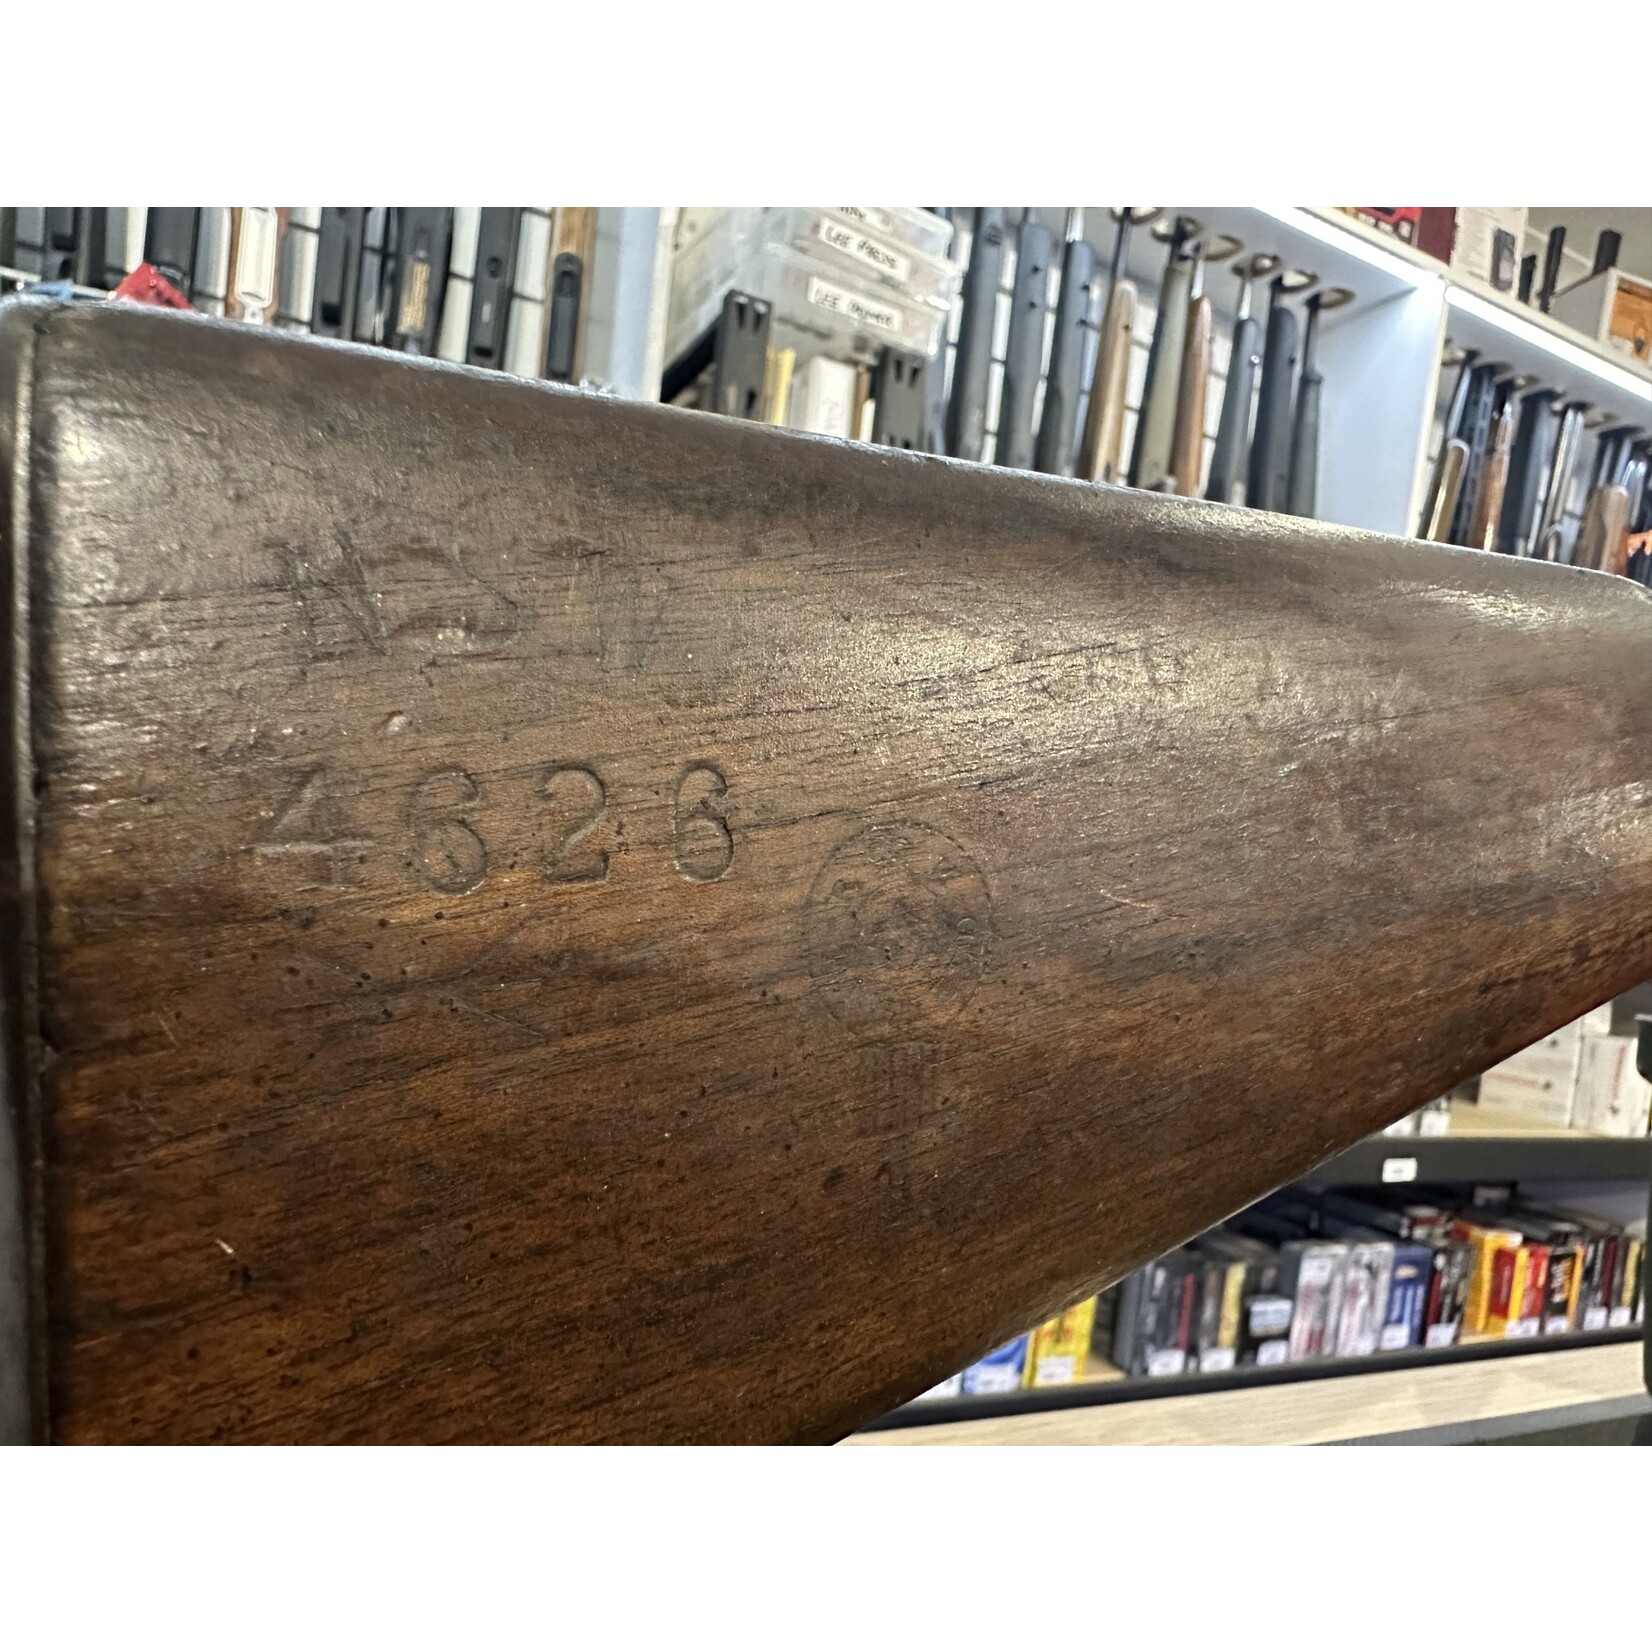 Enfield Pre Owned Enfield MkIII 577-450 Single Shot Rifle - 1883 Manufacture - NSW Issue 4626 of 6500